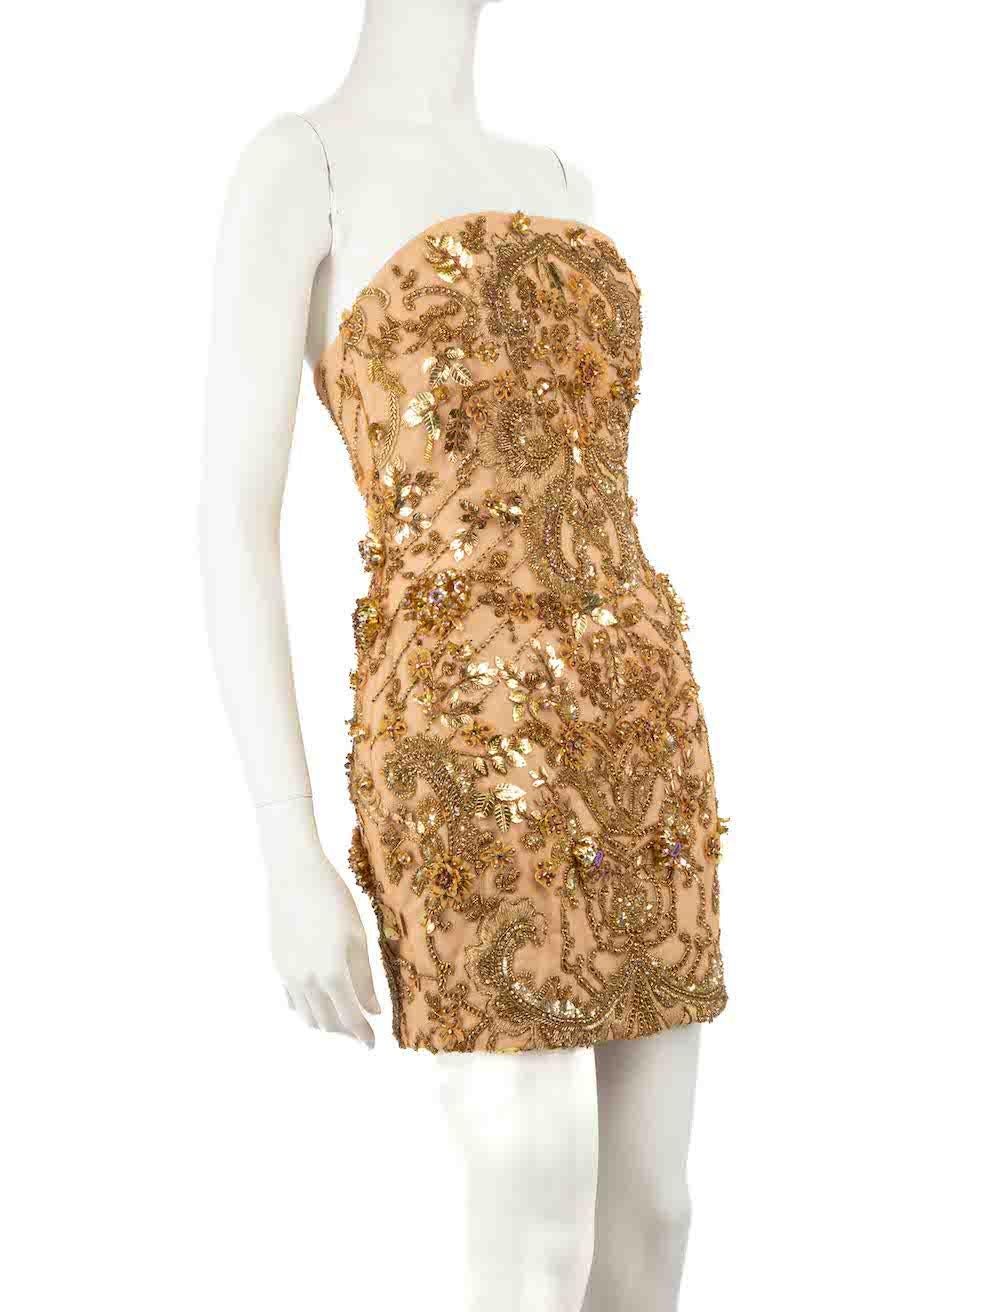 CONDITION is Good. General wear to dress is evident. Moderate signs of wear to the embellishment where a number of stray thread ends and plucks to the stitching can be seen on this used Honayda designer resale item.
 
 
 
 Details
 
 
 Gold
 
